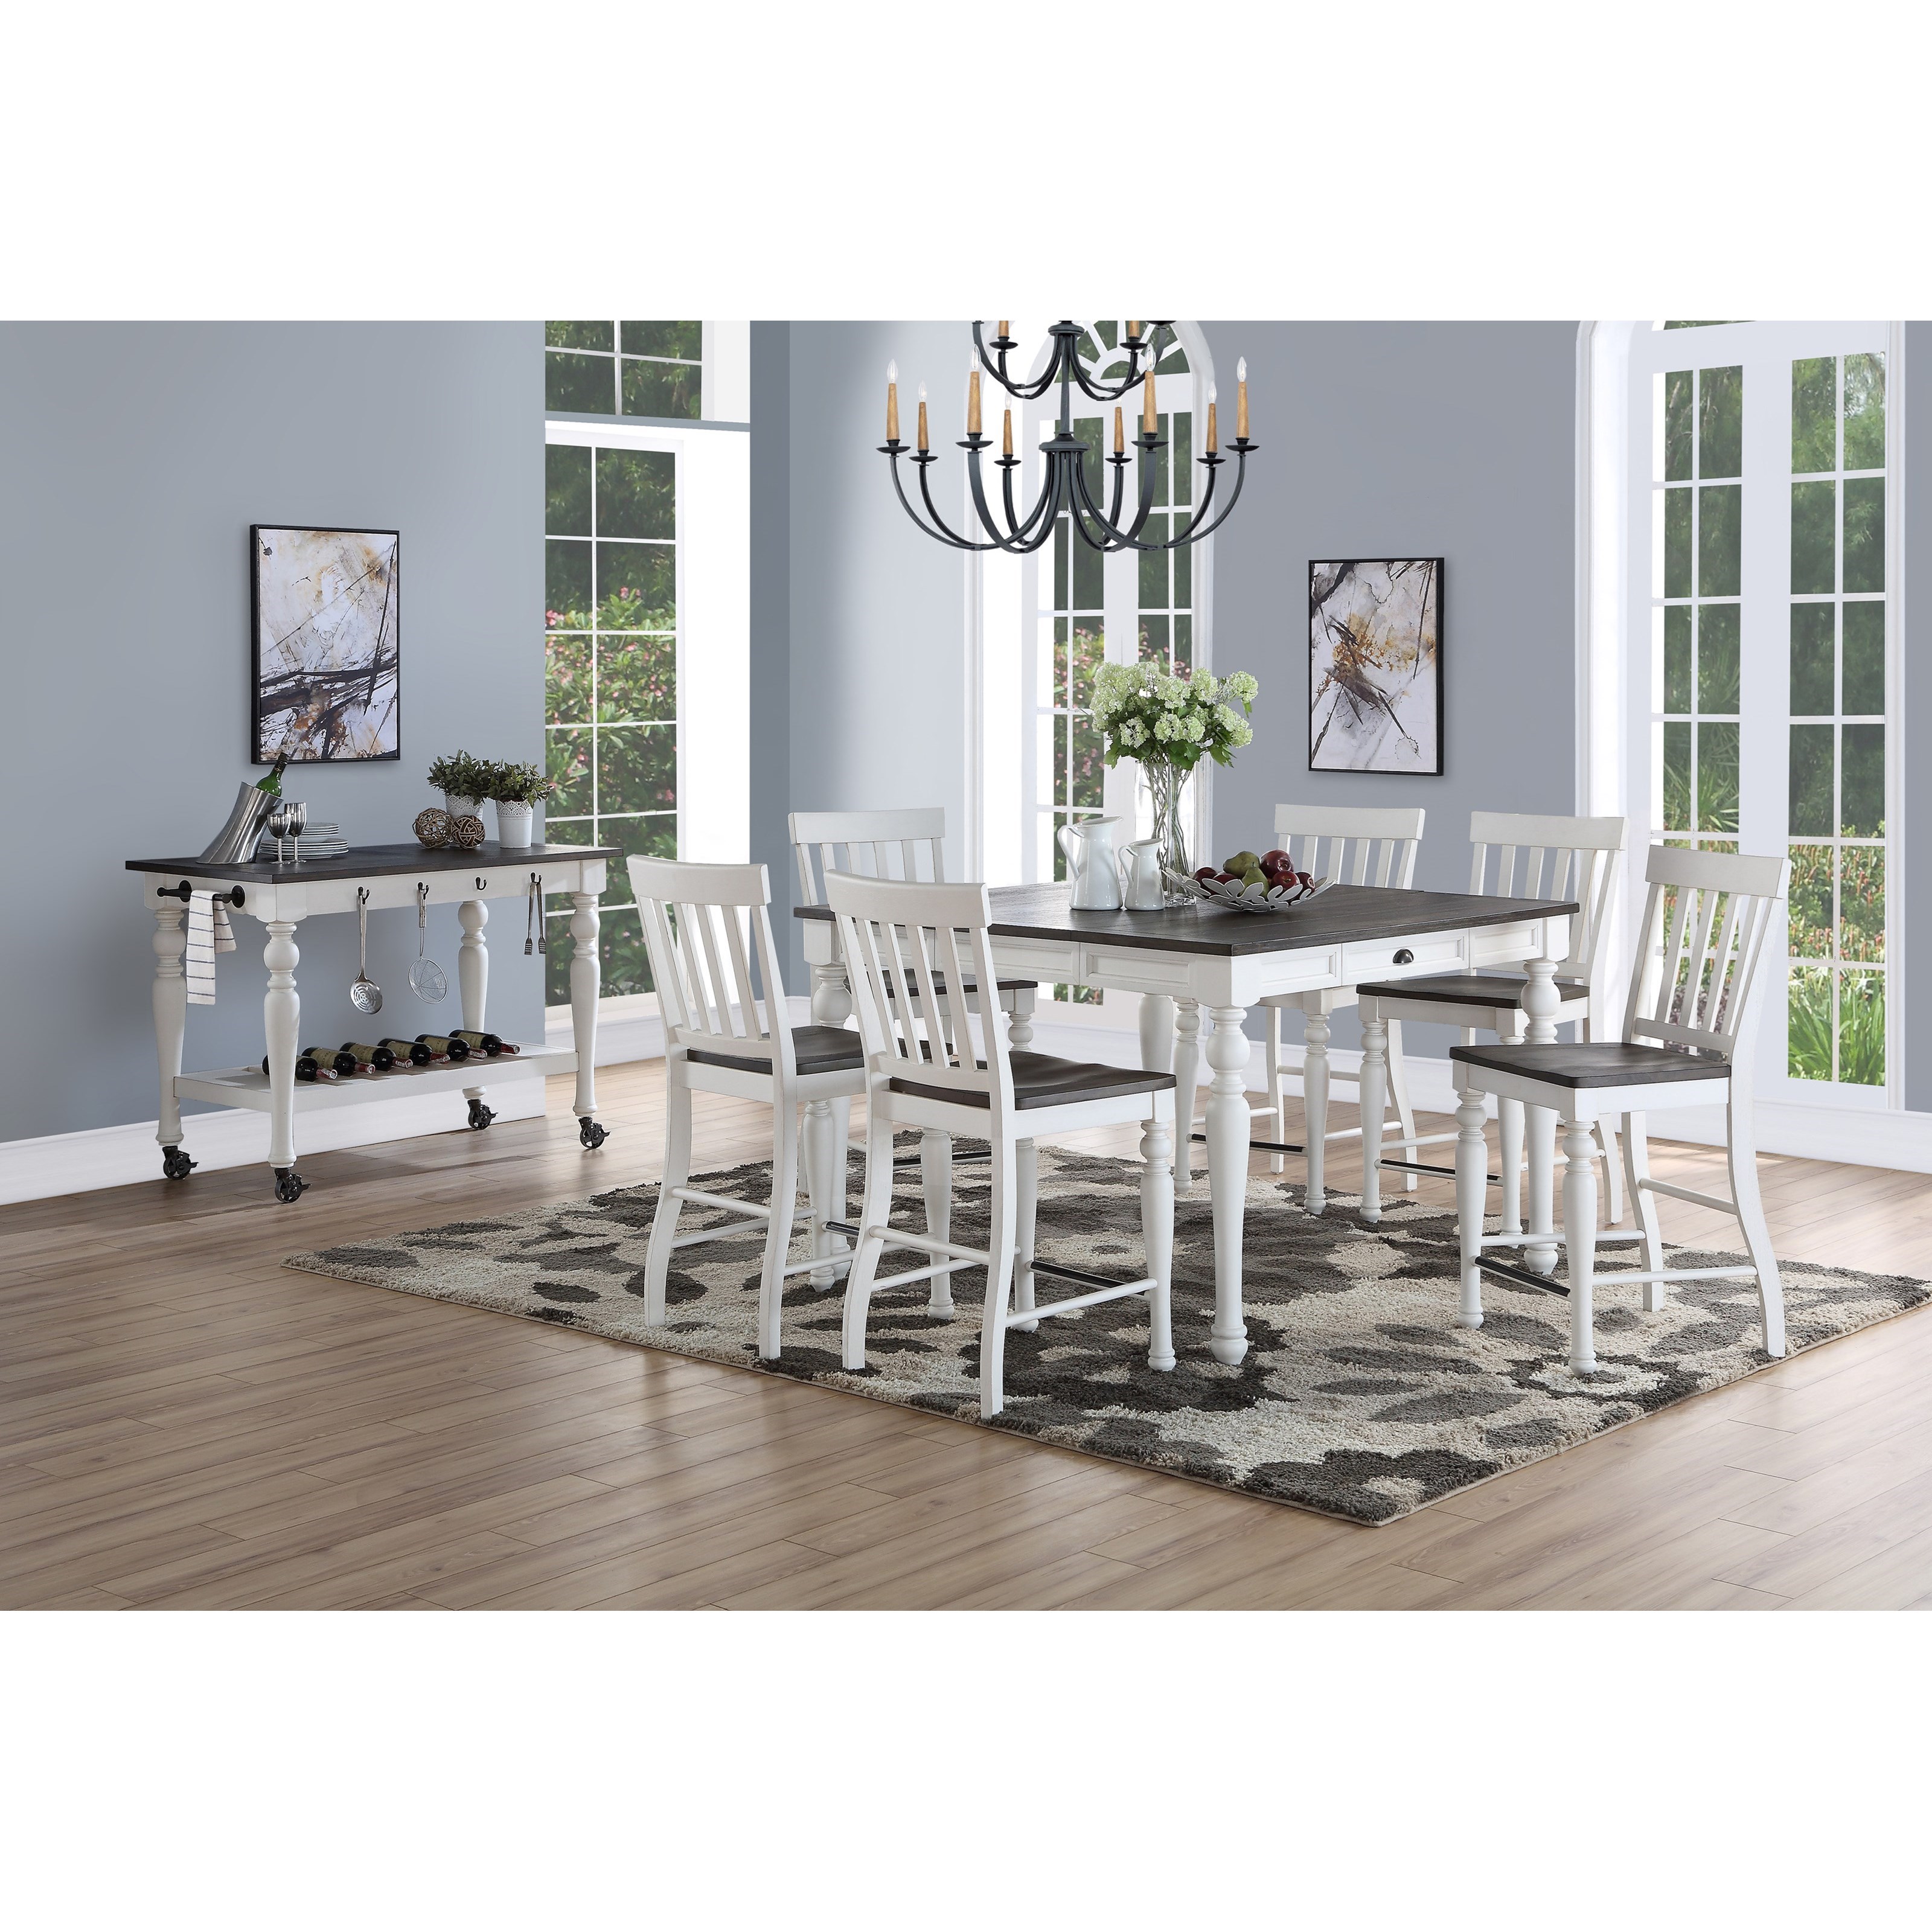 BRENTWOOD 7pc Transitional Silver Taupe Dining Room Rectangular Table Chairs Set 